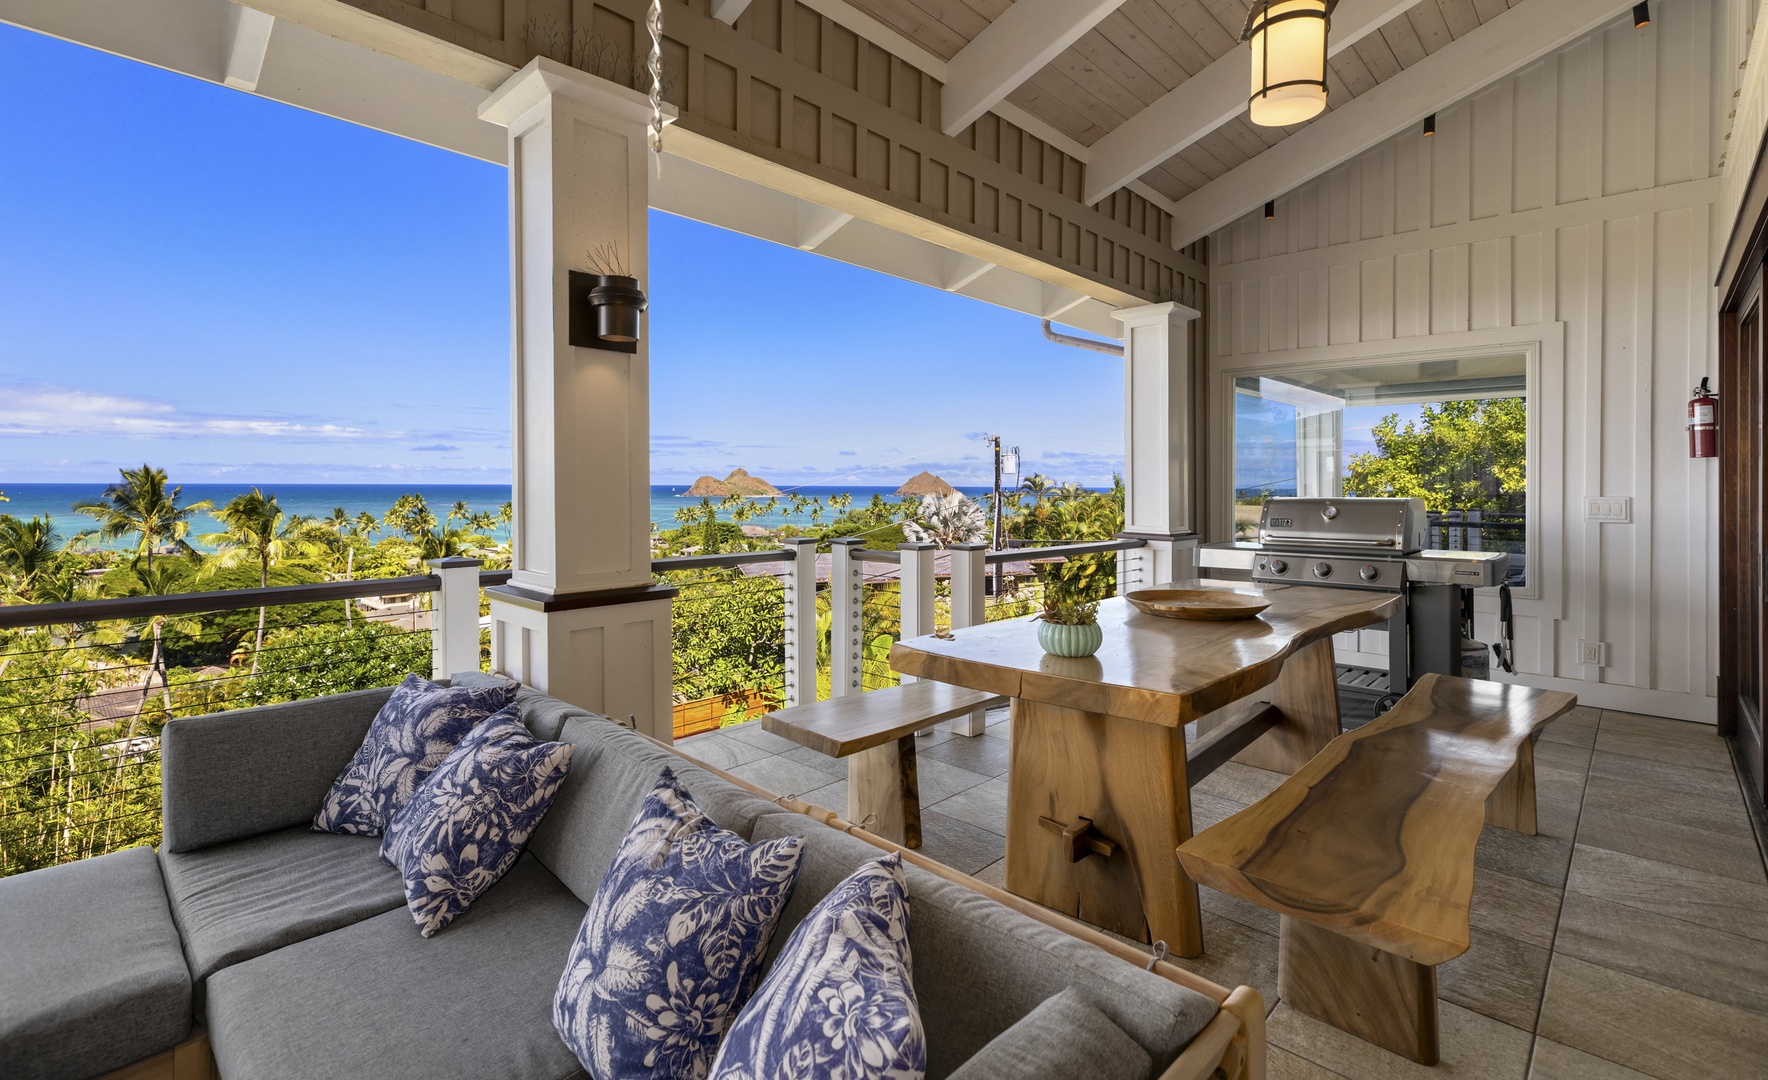 Kailua Vacation Rentals, Lanikai Villa* - There are plenty of options for entertainment on the main lanai with and outdoor lounge and dining area with a BBQ